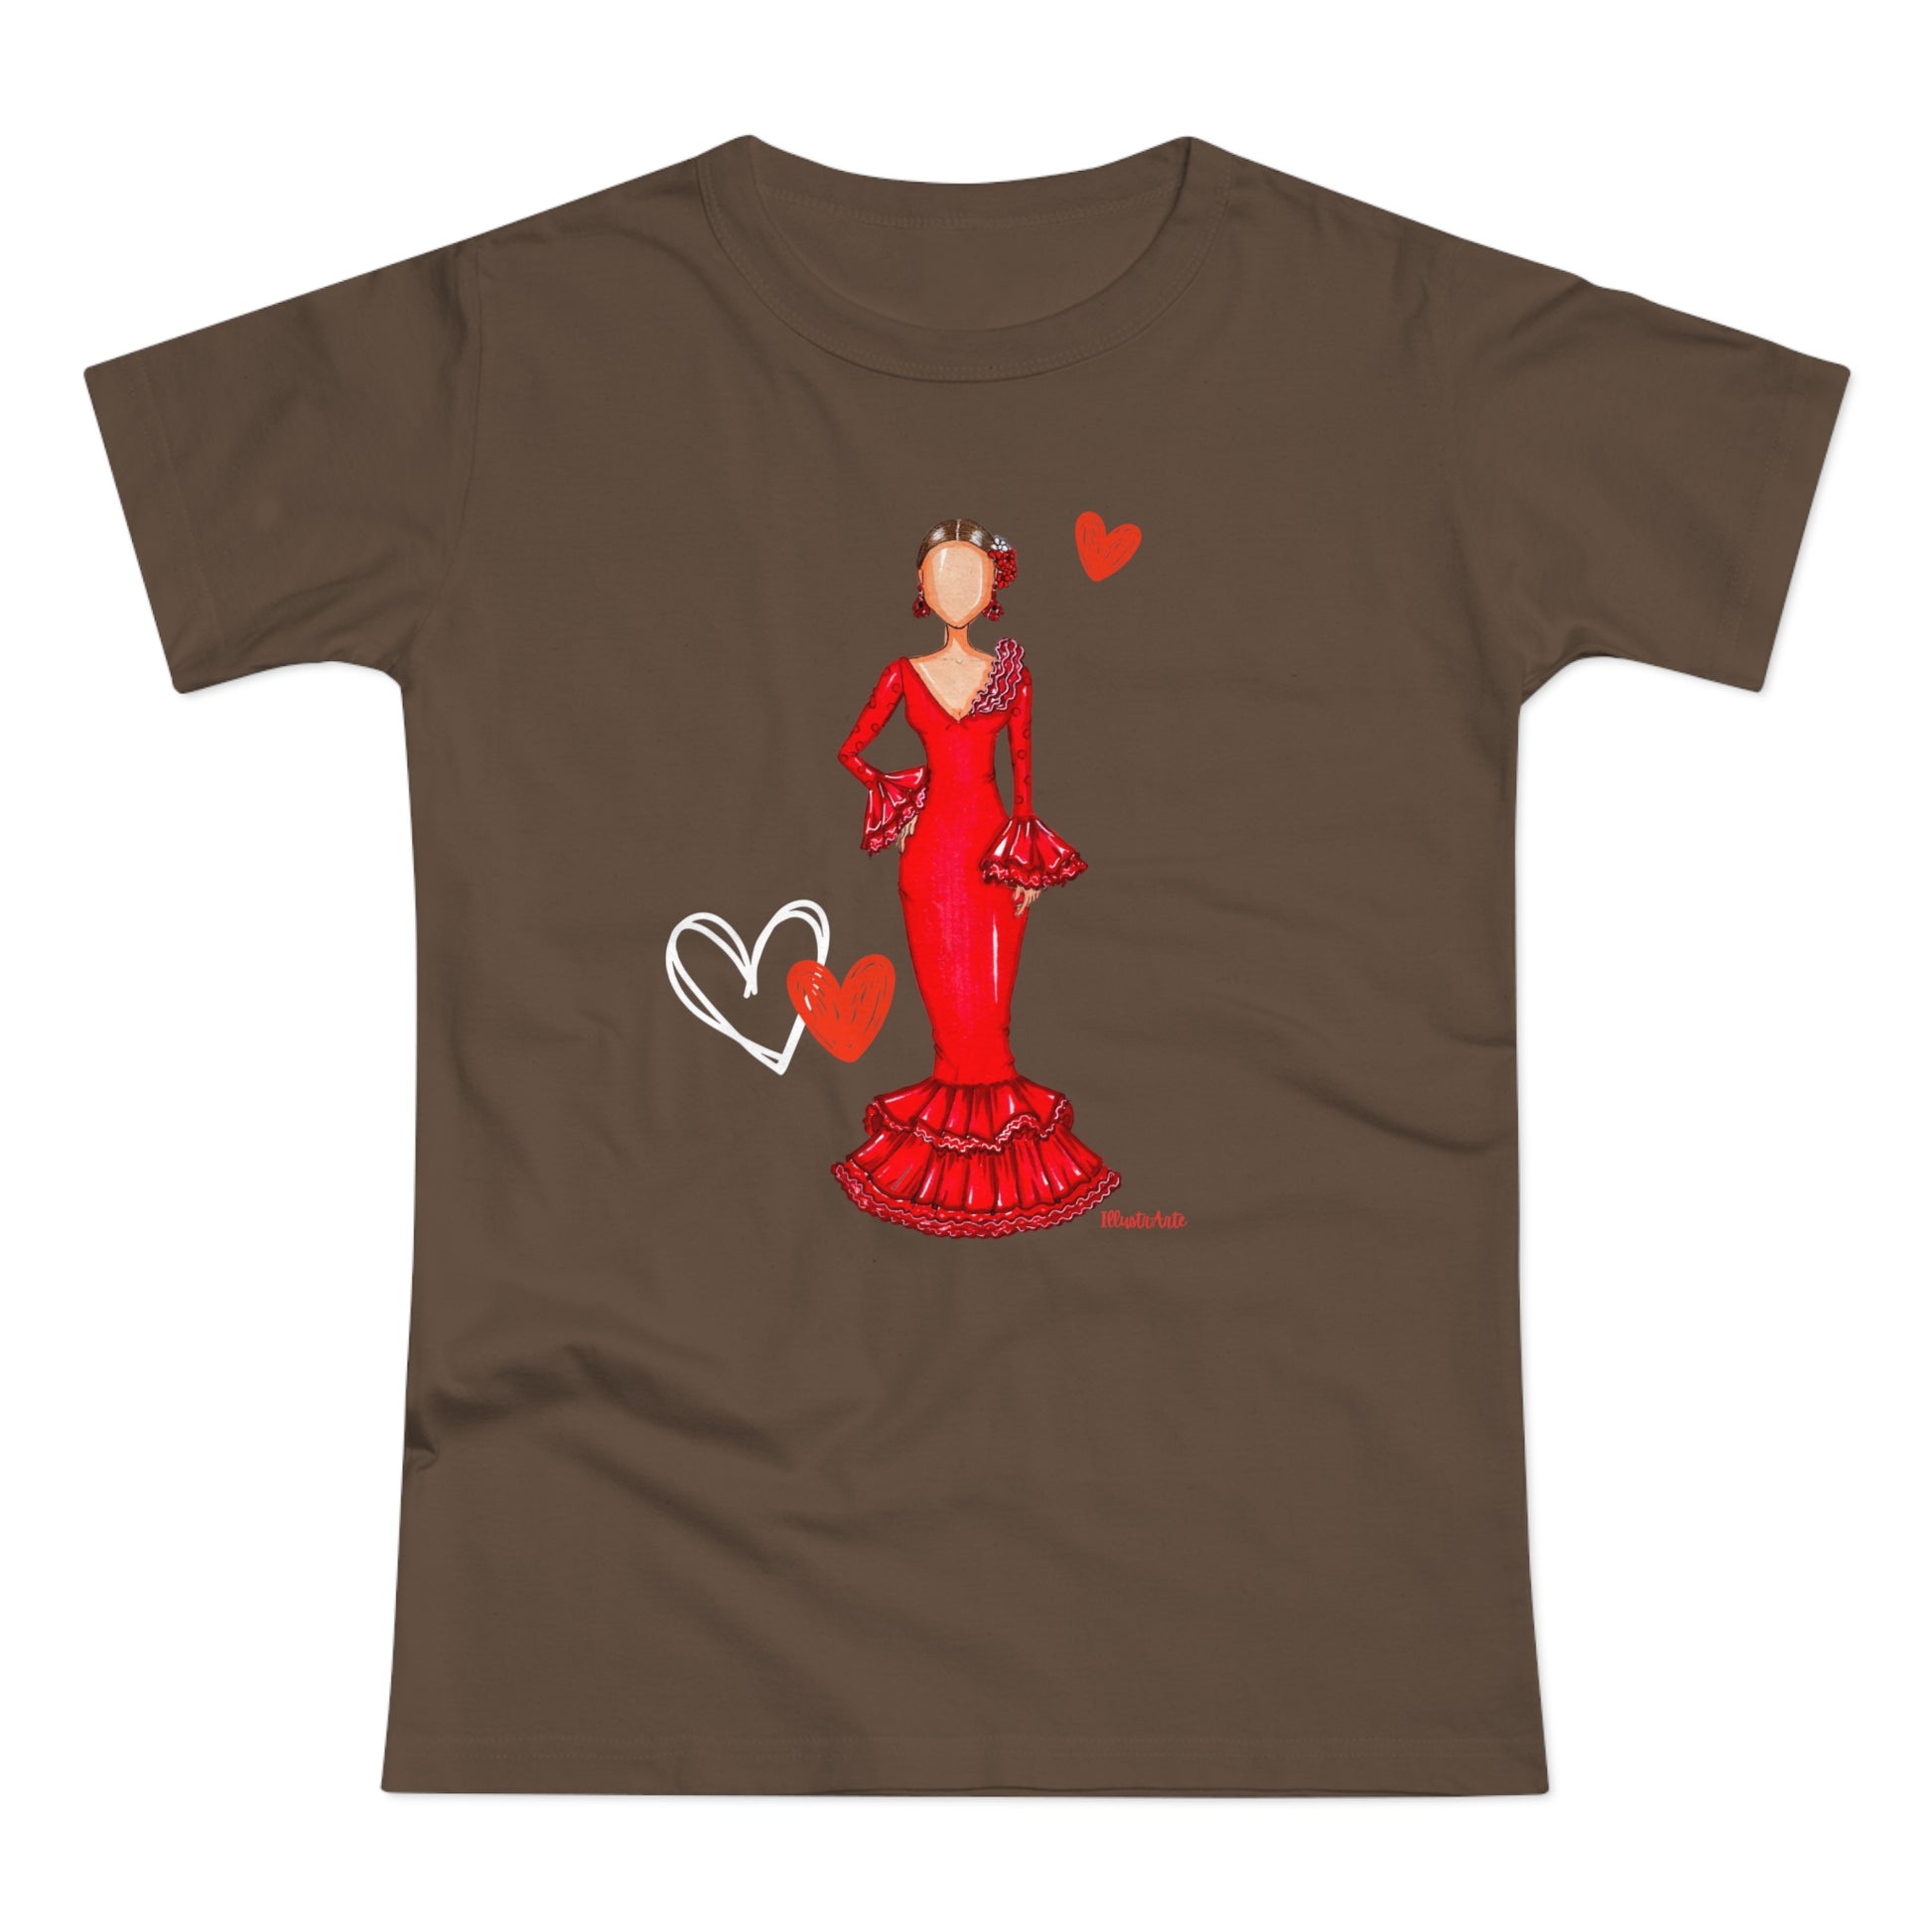 a women's t - shirt with a woman in a red dress